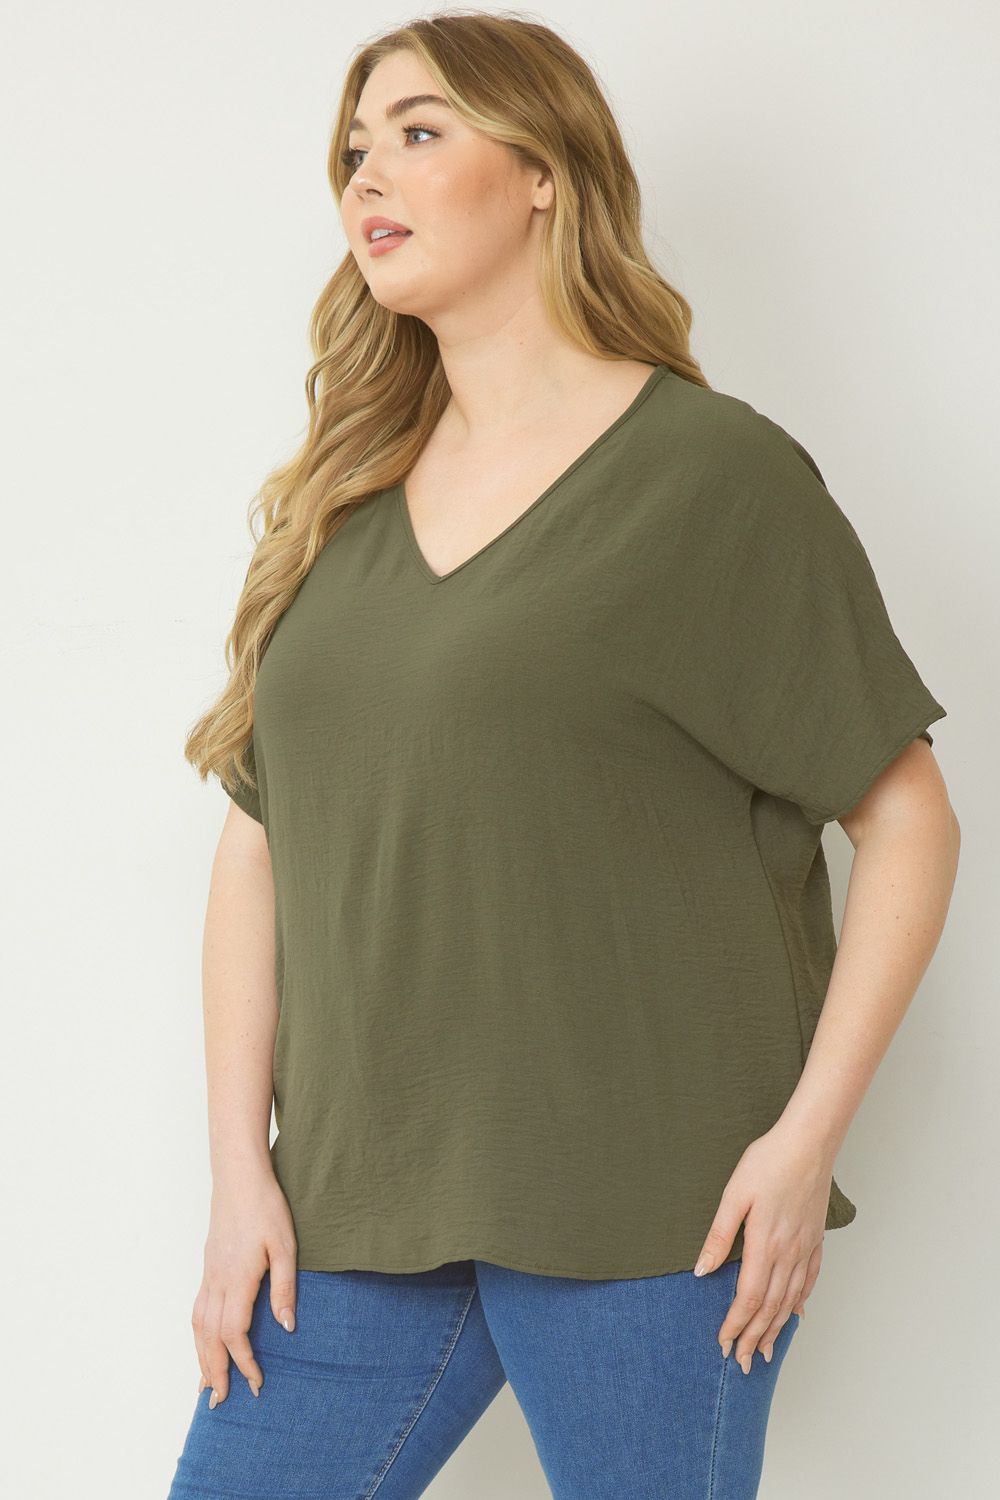 "Everyday Charm" Top (Olive) - Happily Ever Aften